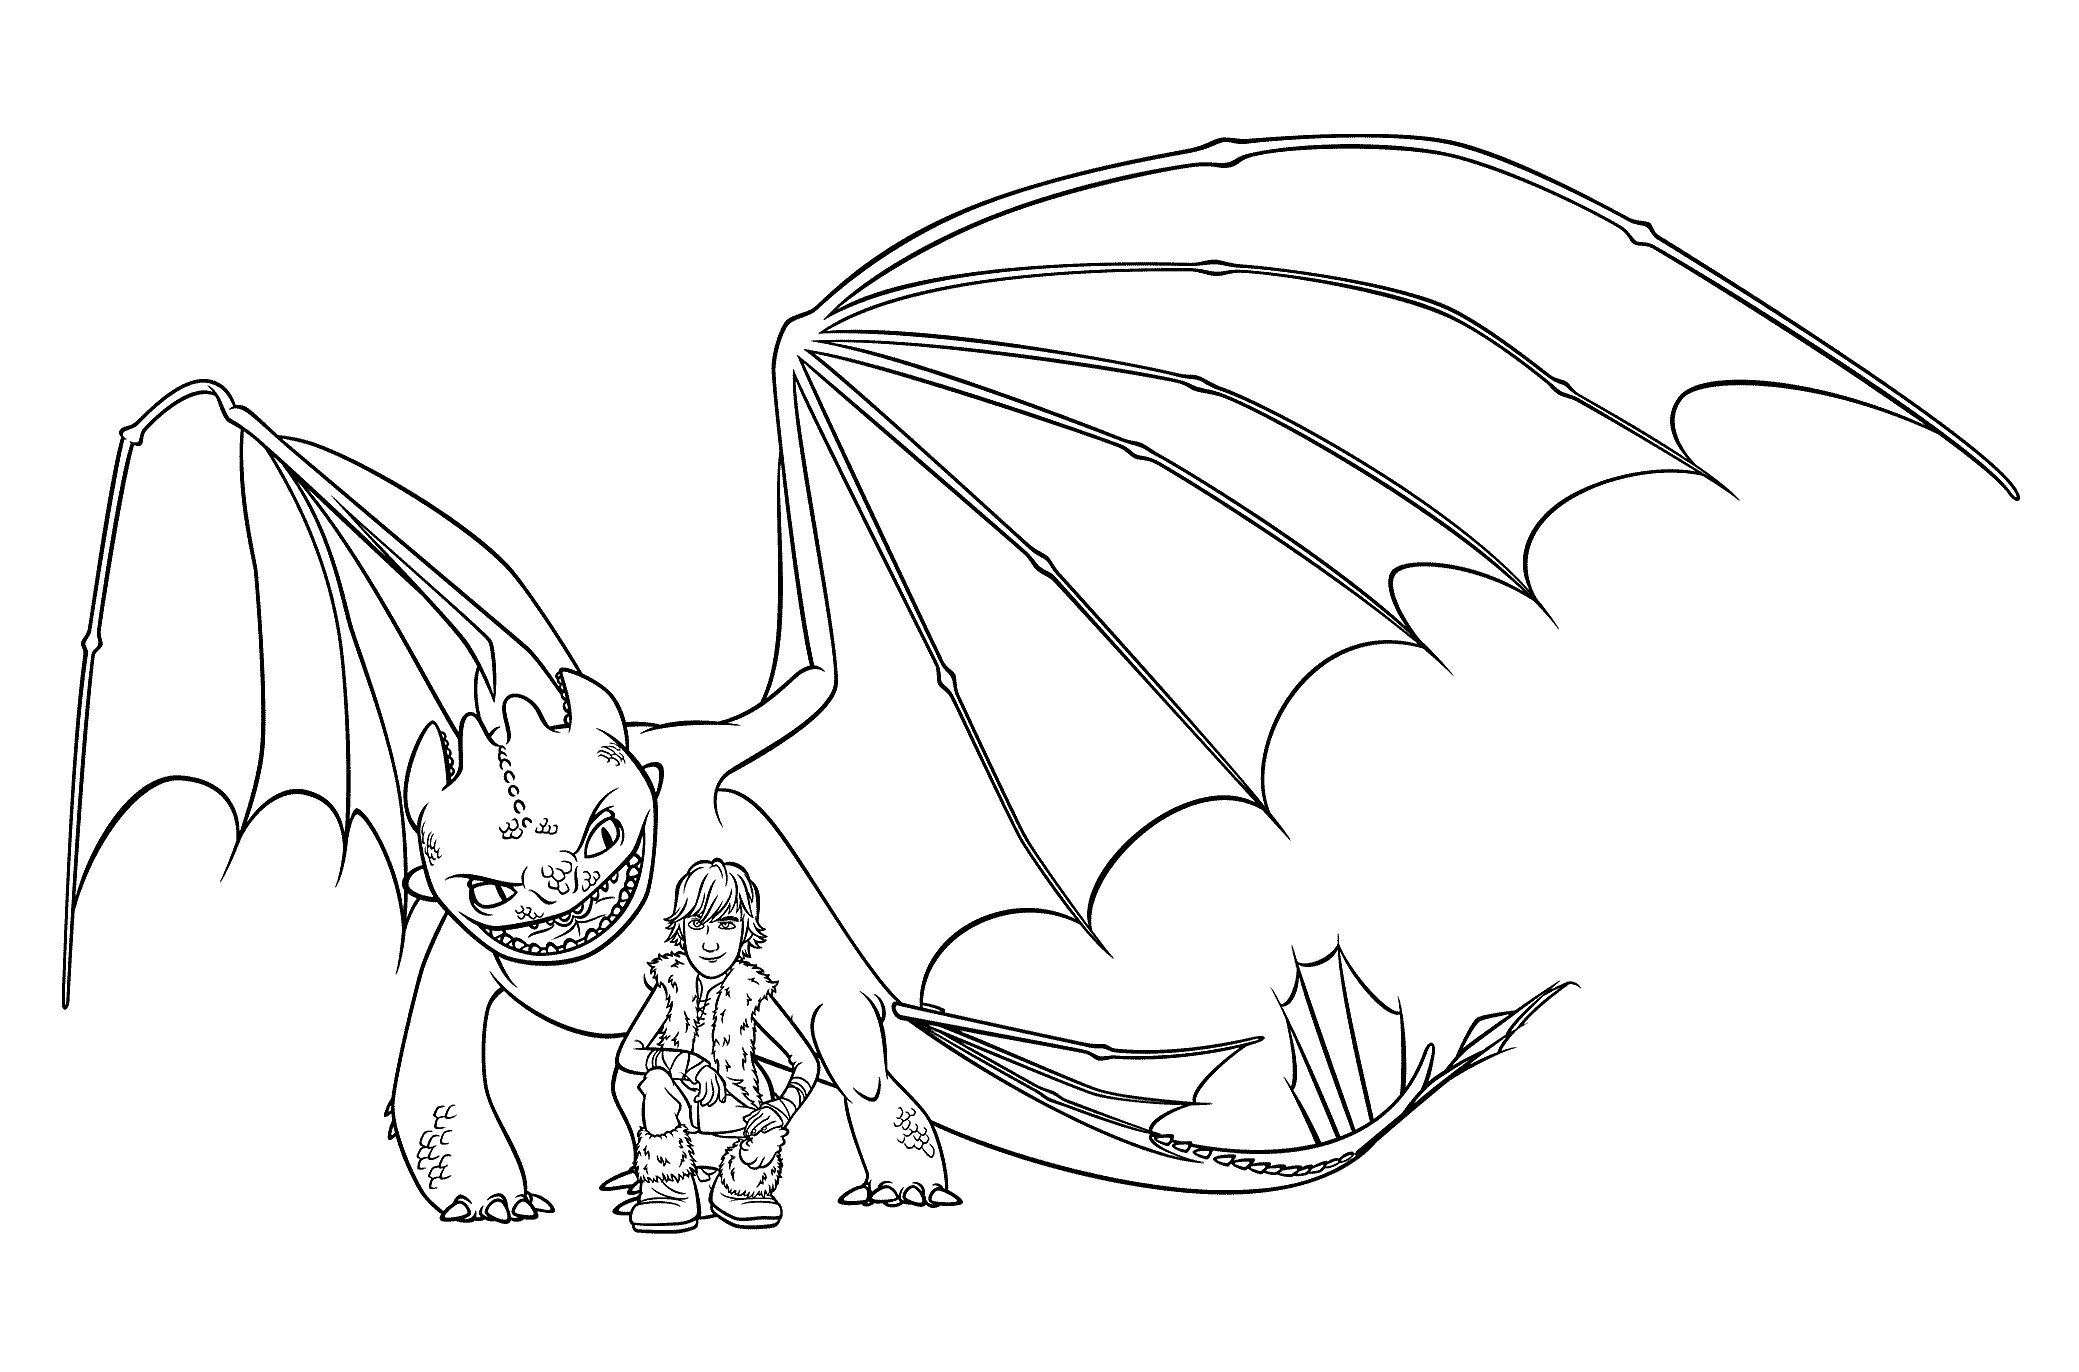 hiccup and toothless coloring pages